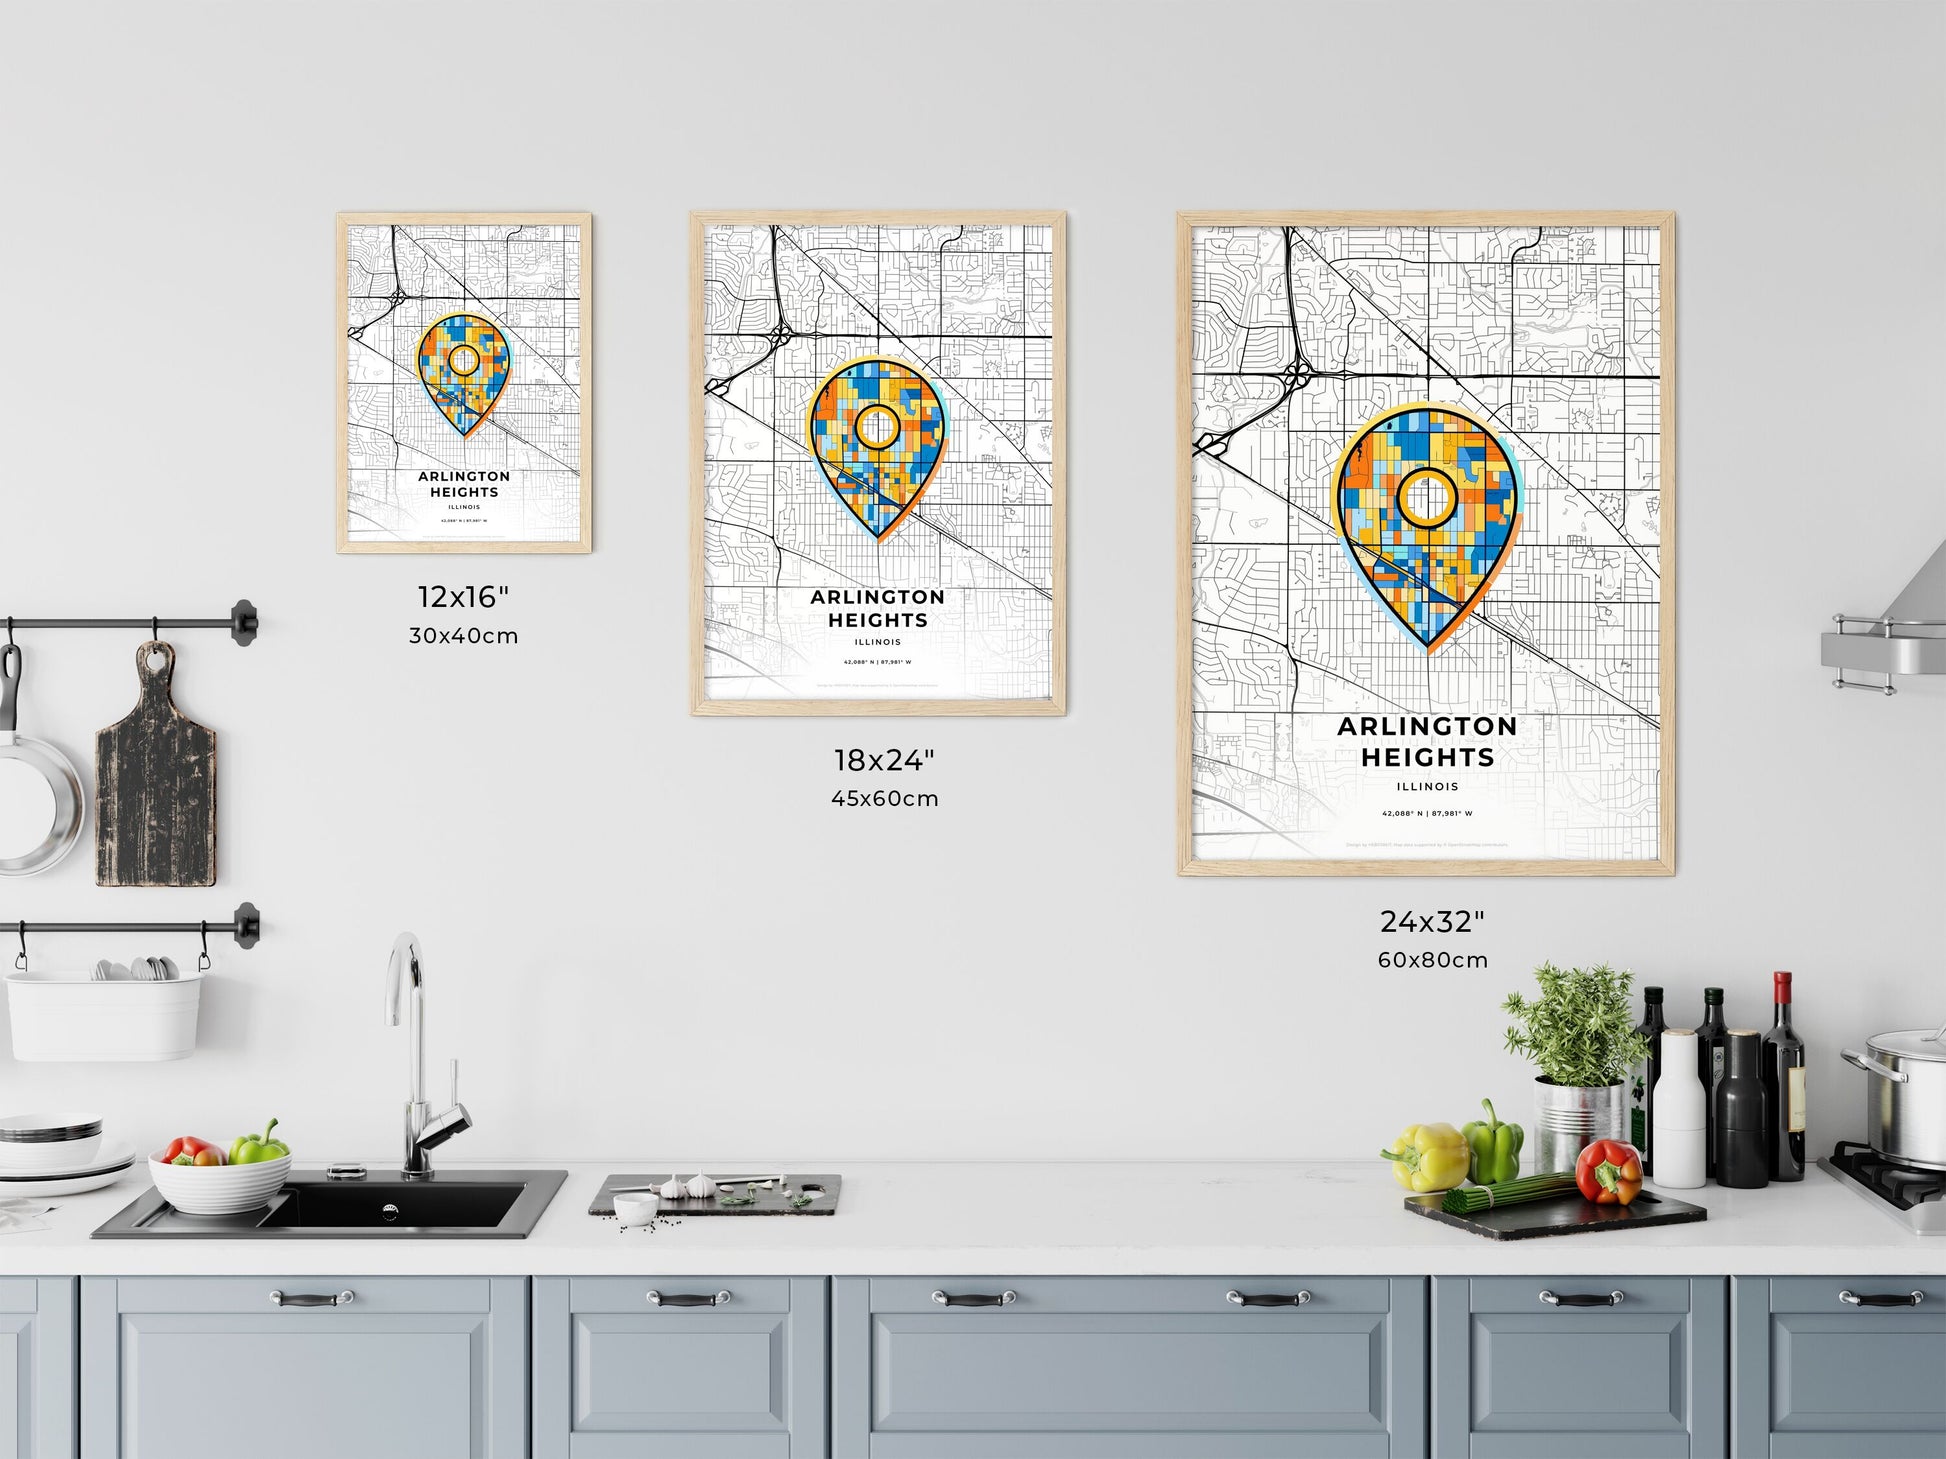 ARLINGTON HEIGHTS ILLINOIS minimal art map with a colorful icon. Where it all began, Couple map gift.